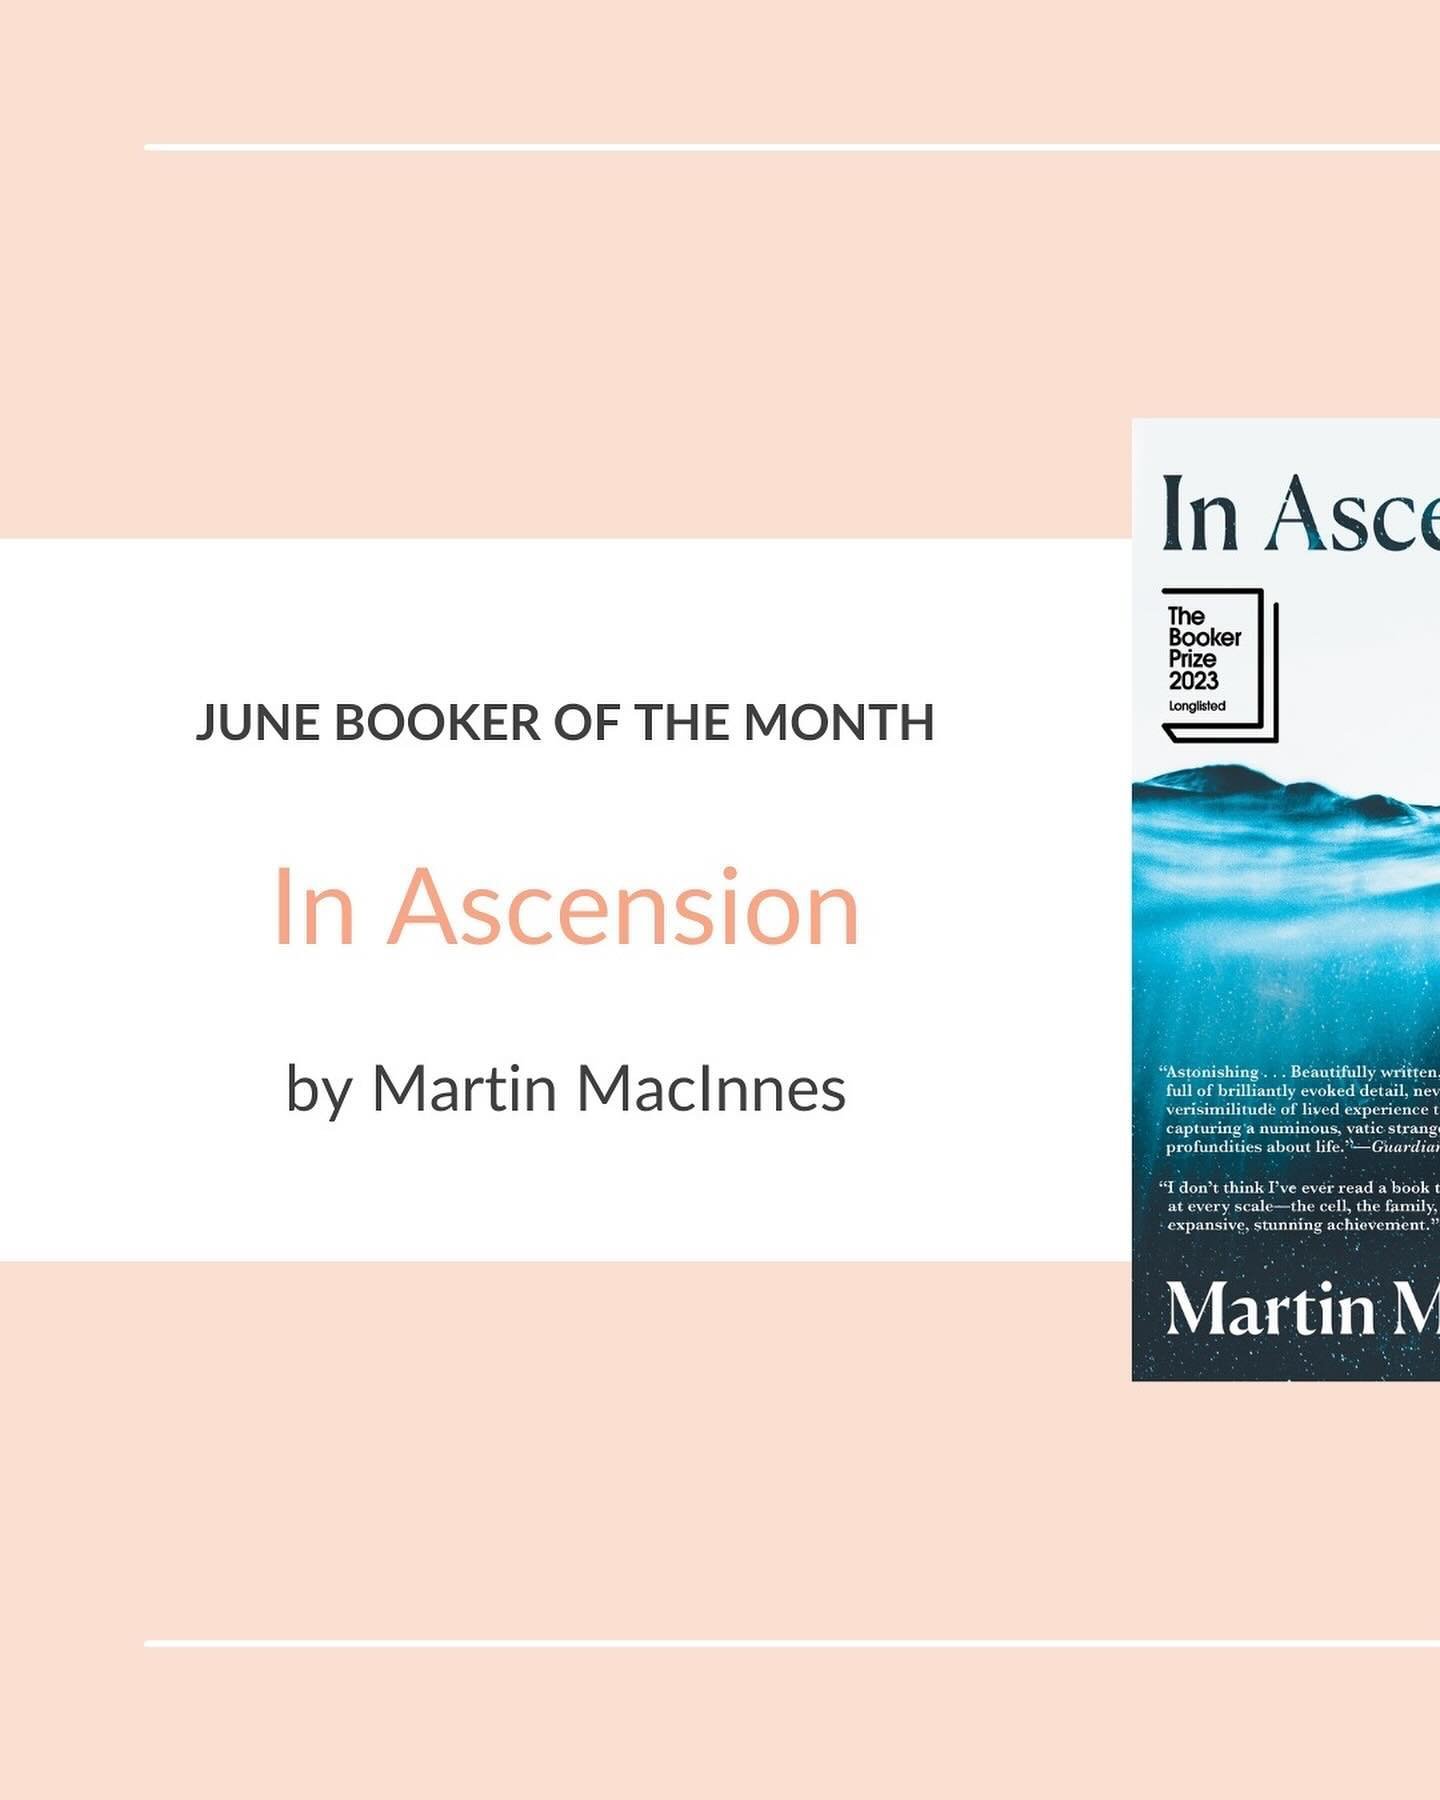 ☀️ June Booker of the Month! ☀️
⠀⠀⠀⠀⠀⠀⠀⠀⠀
Okay, I know it&rsquo;s not QUITE June yet, but I wanted to get the word out sooner rather than later because this month&rsquo;s selection,&nbsp;In Ascension, is on the longer side: about 500 pages. But there